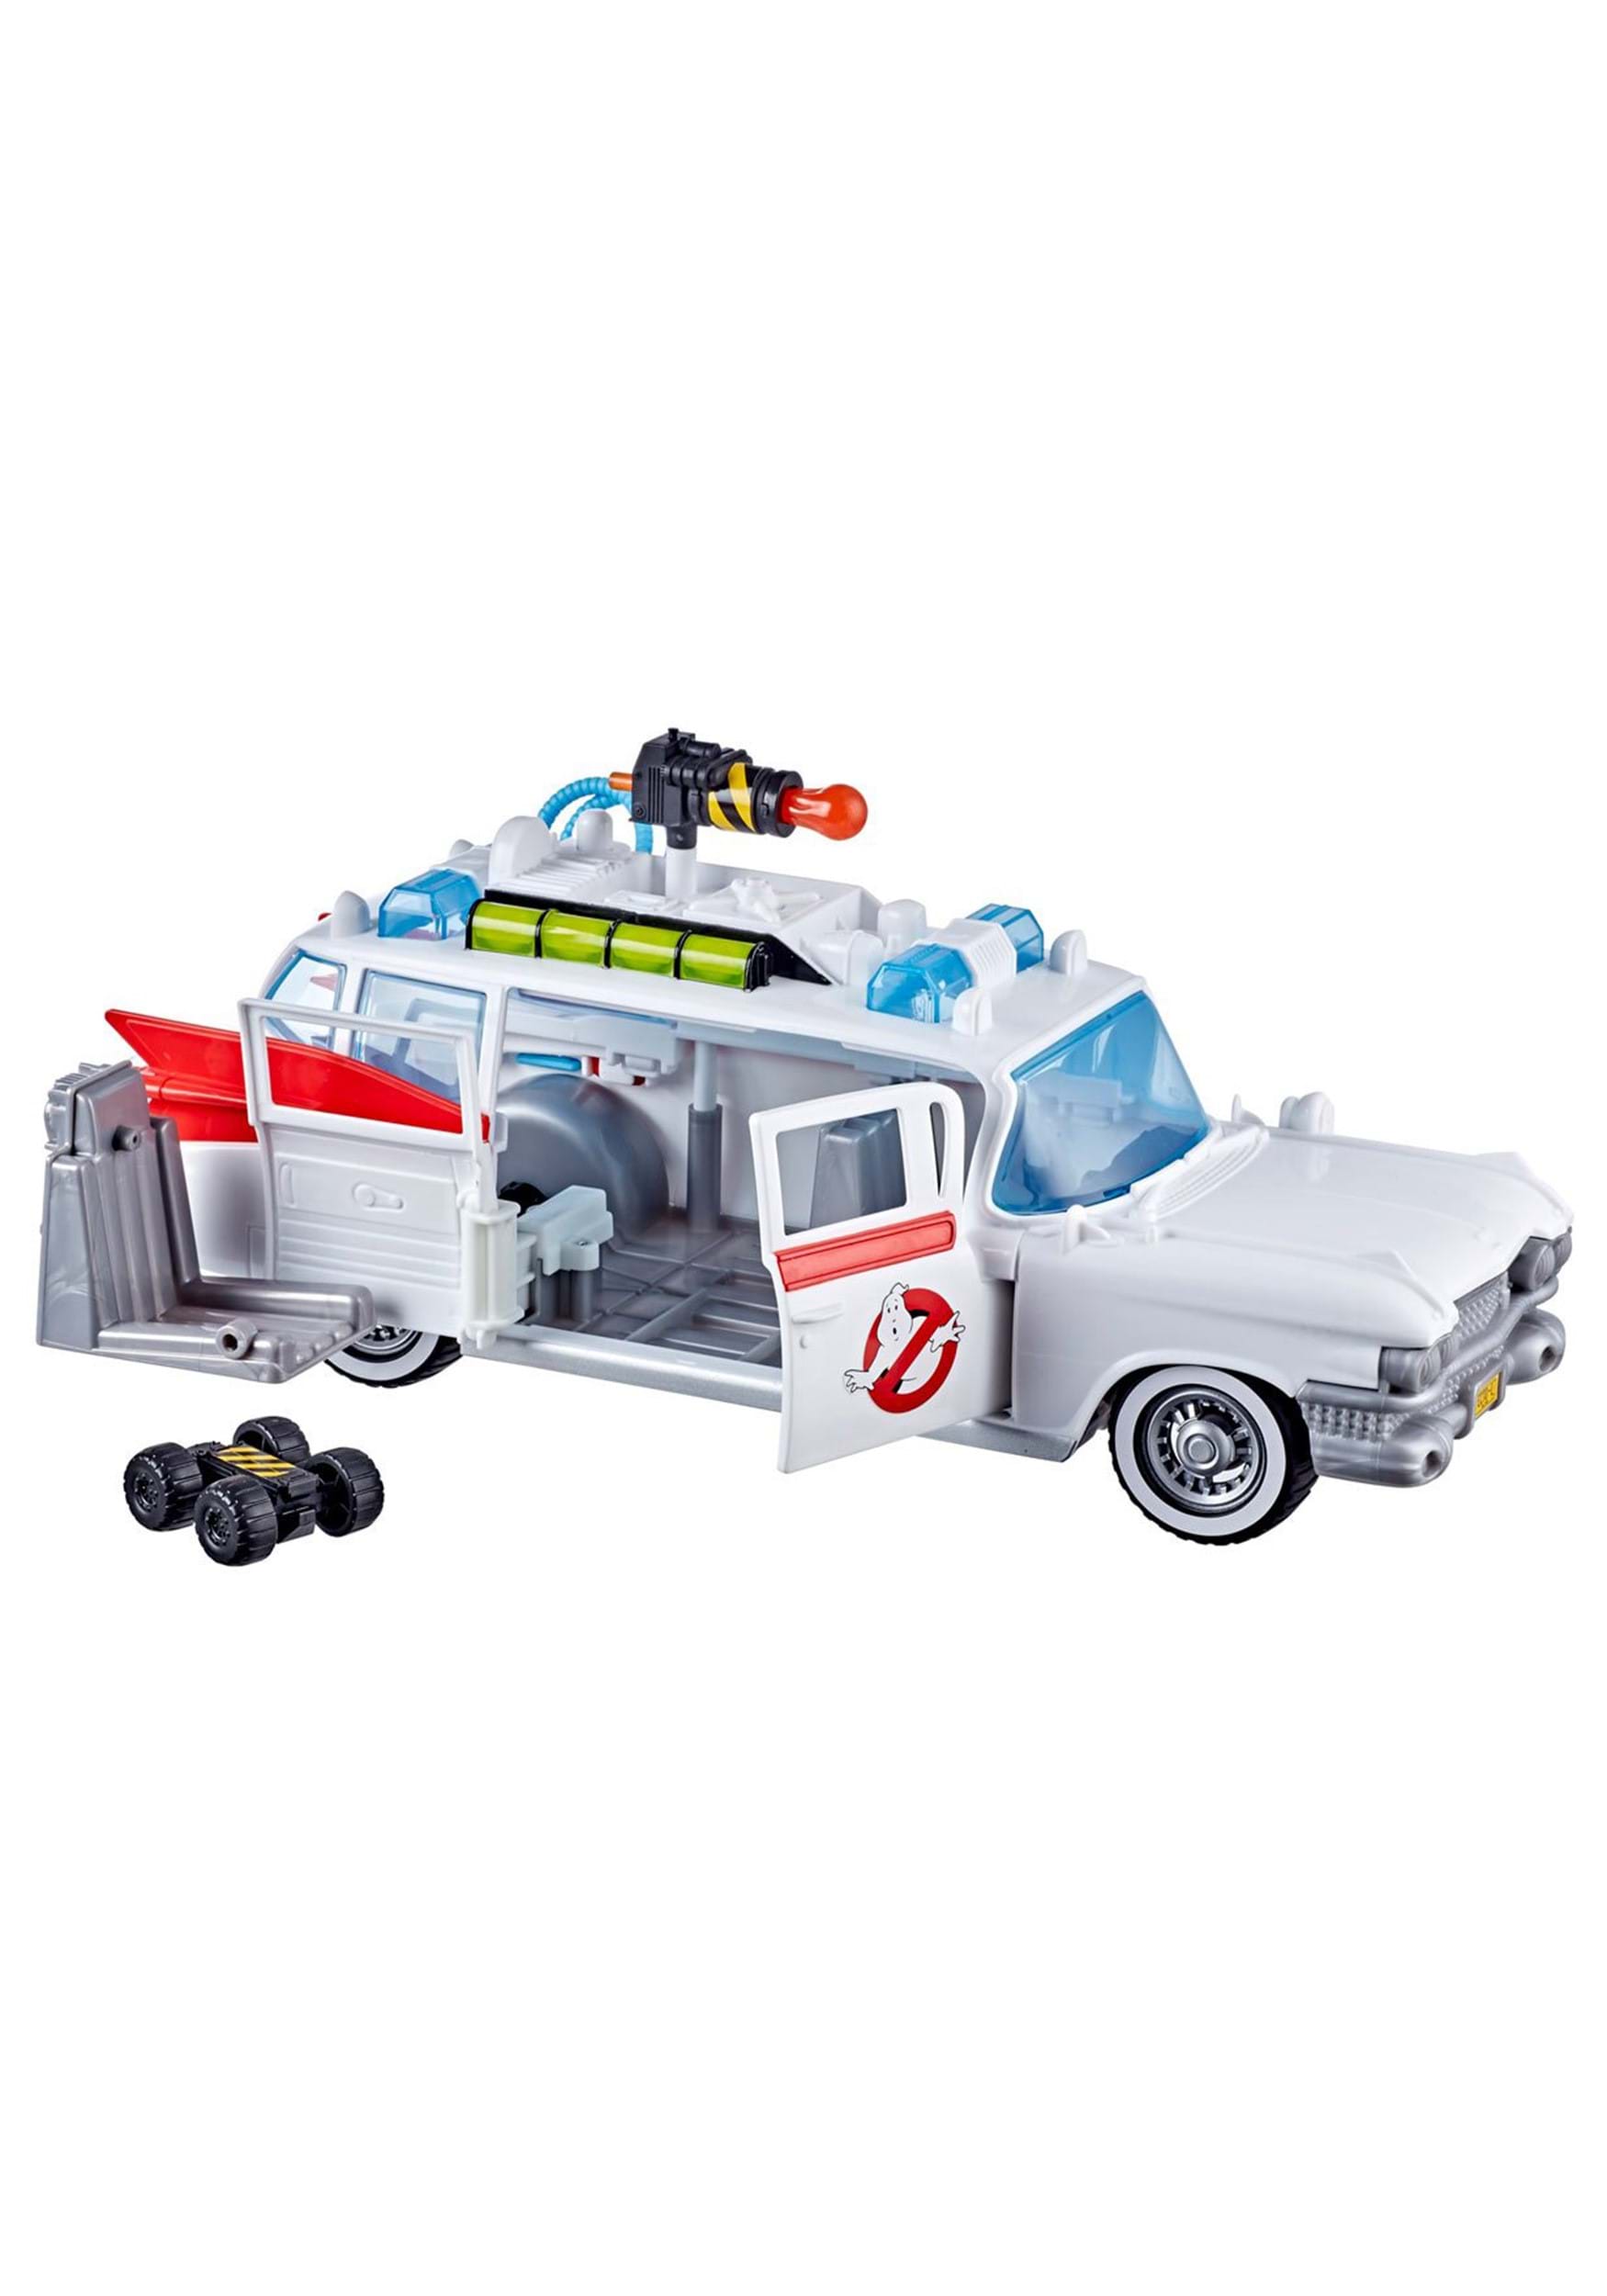 Ghostbusters Classic Ecto-1 Inflatable Prop